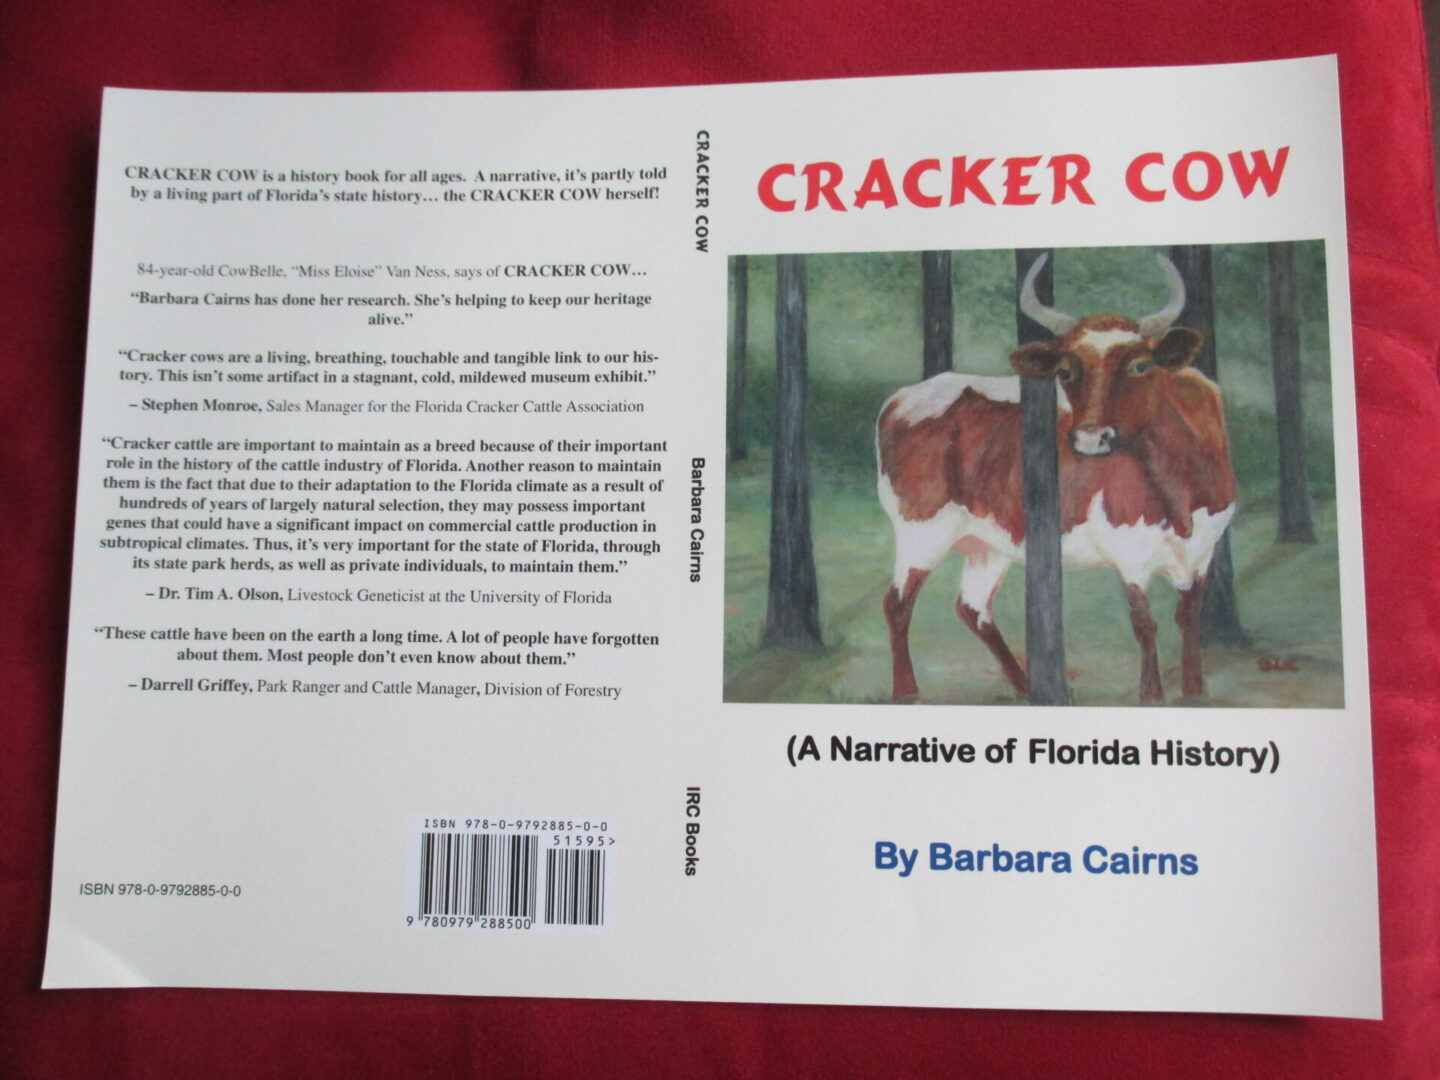 Cracker Cow by Barbara Cairns